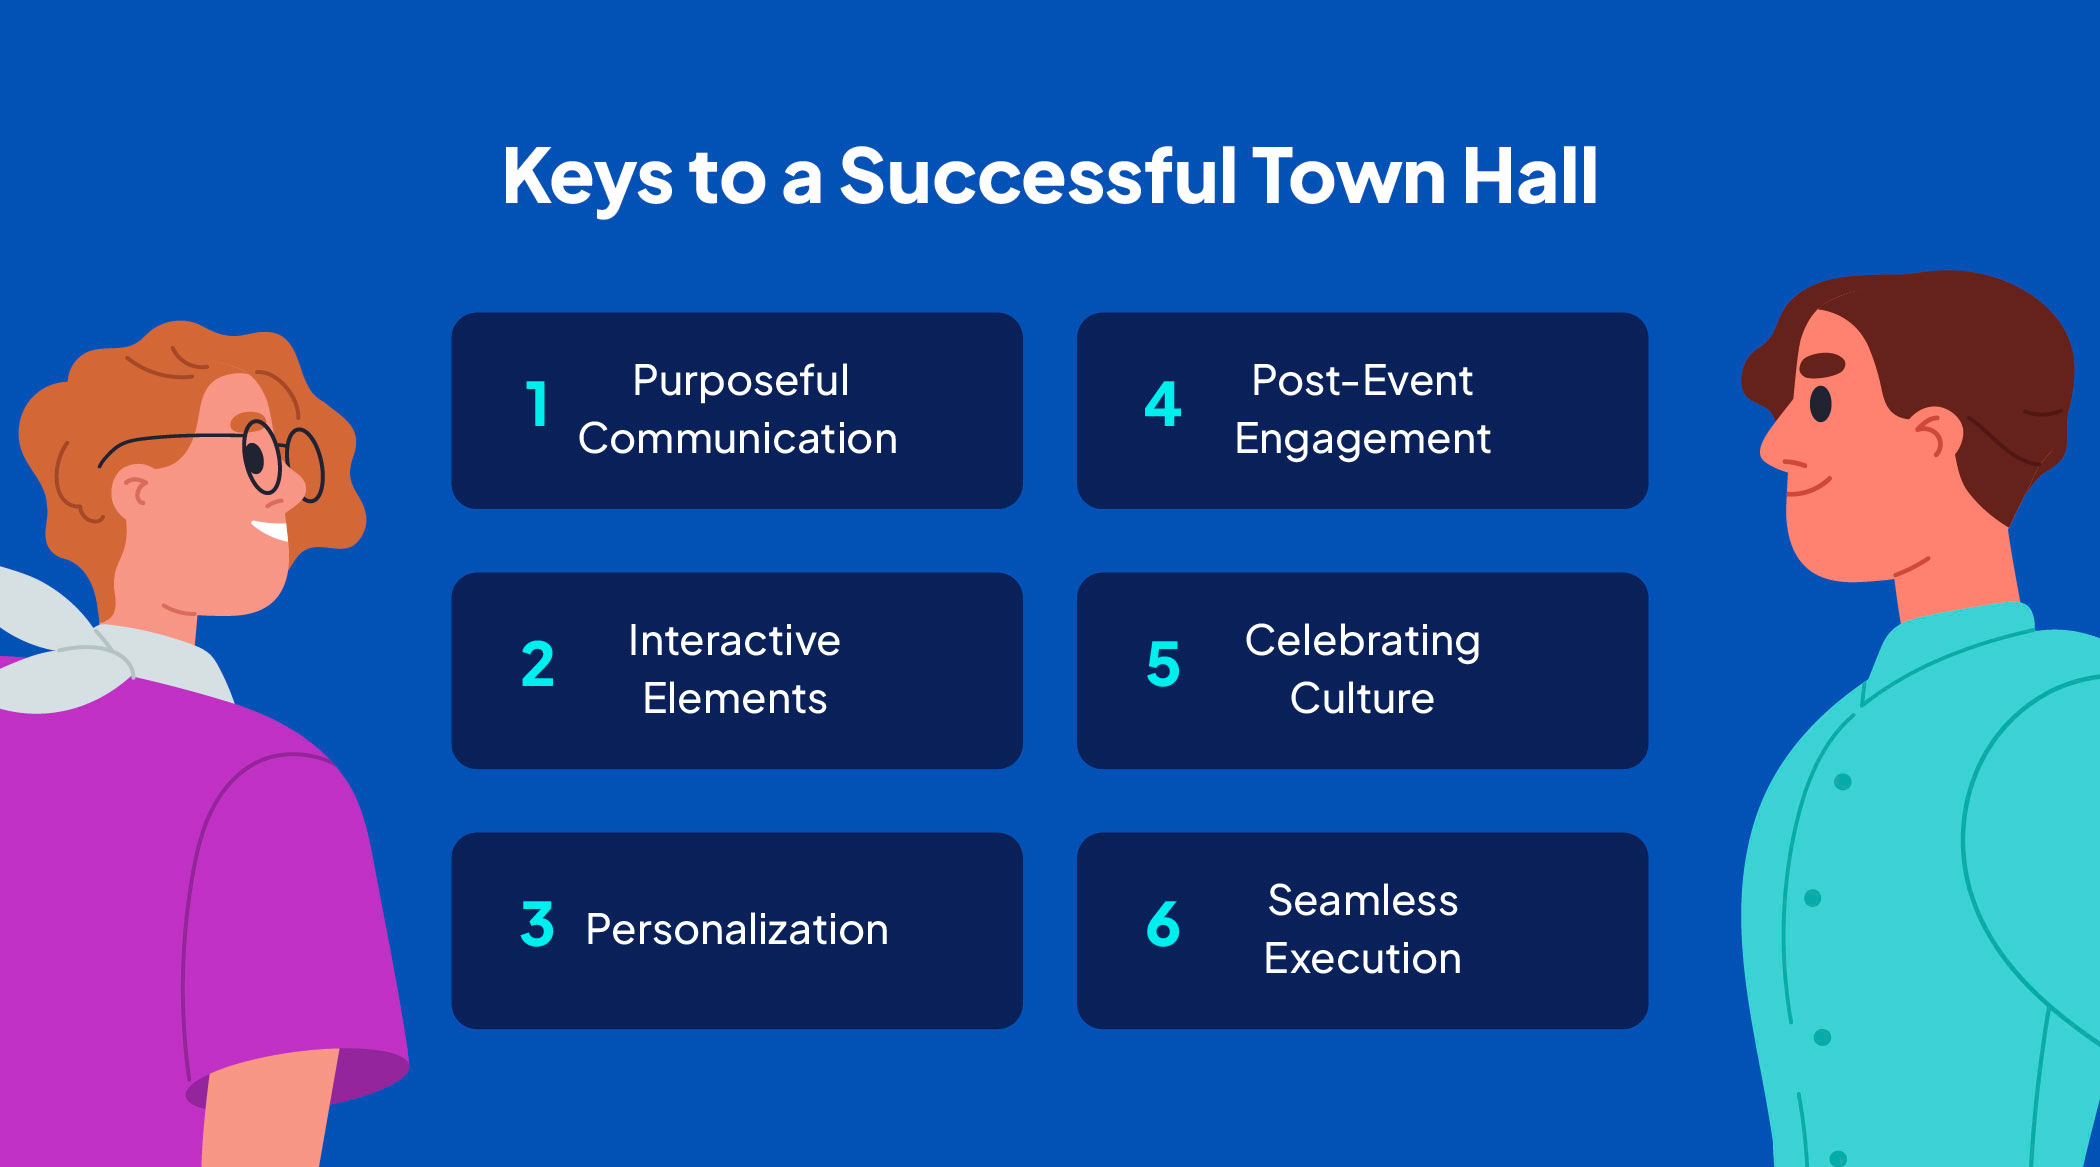 tips for a successful town hall meeting and town hall event